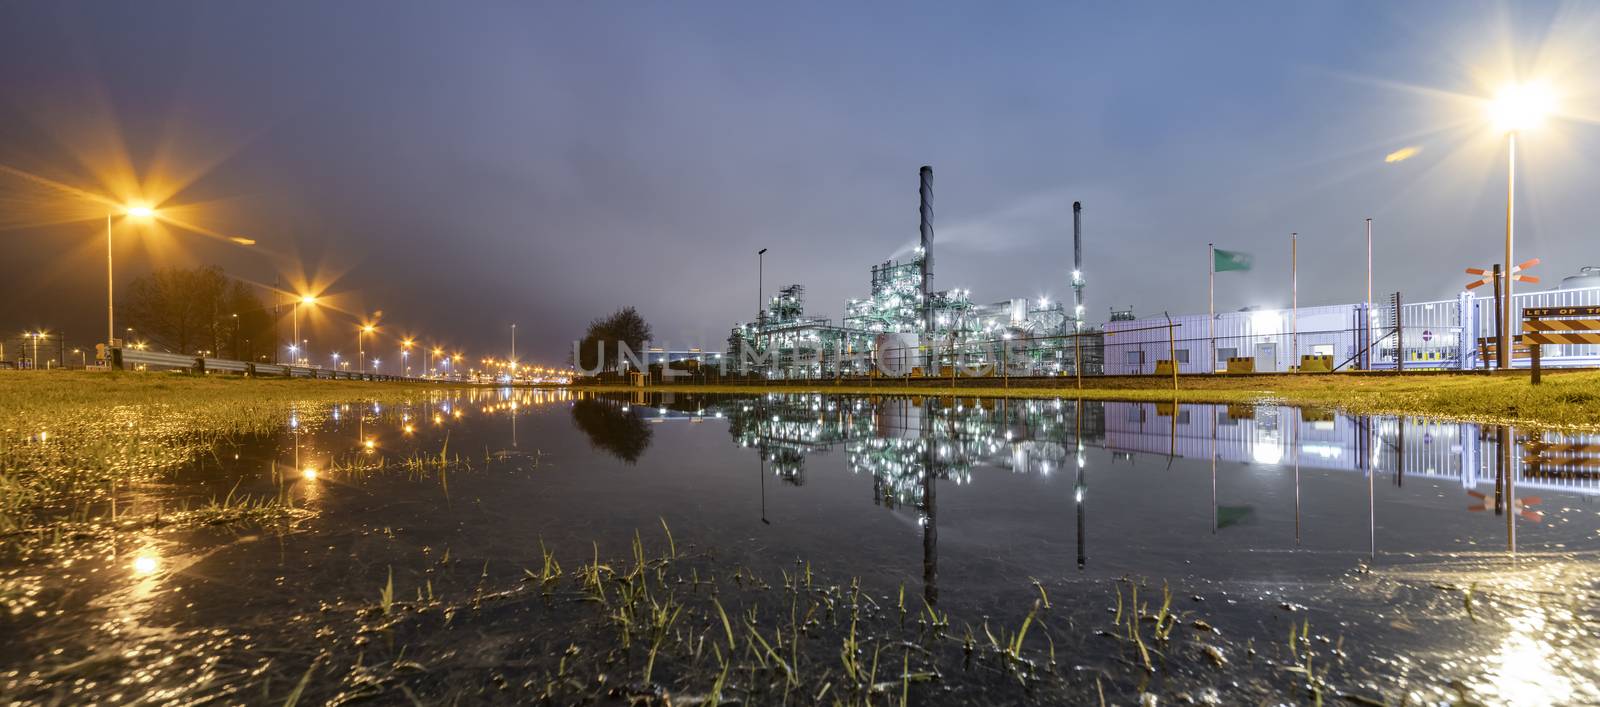 Reflection of the panorama of a refinery and its chimney during the sunset blue hour moment at Rotterdam, Netherlands by ankorlight